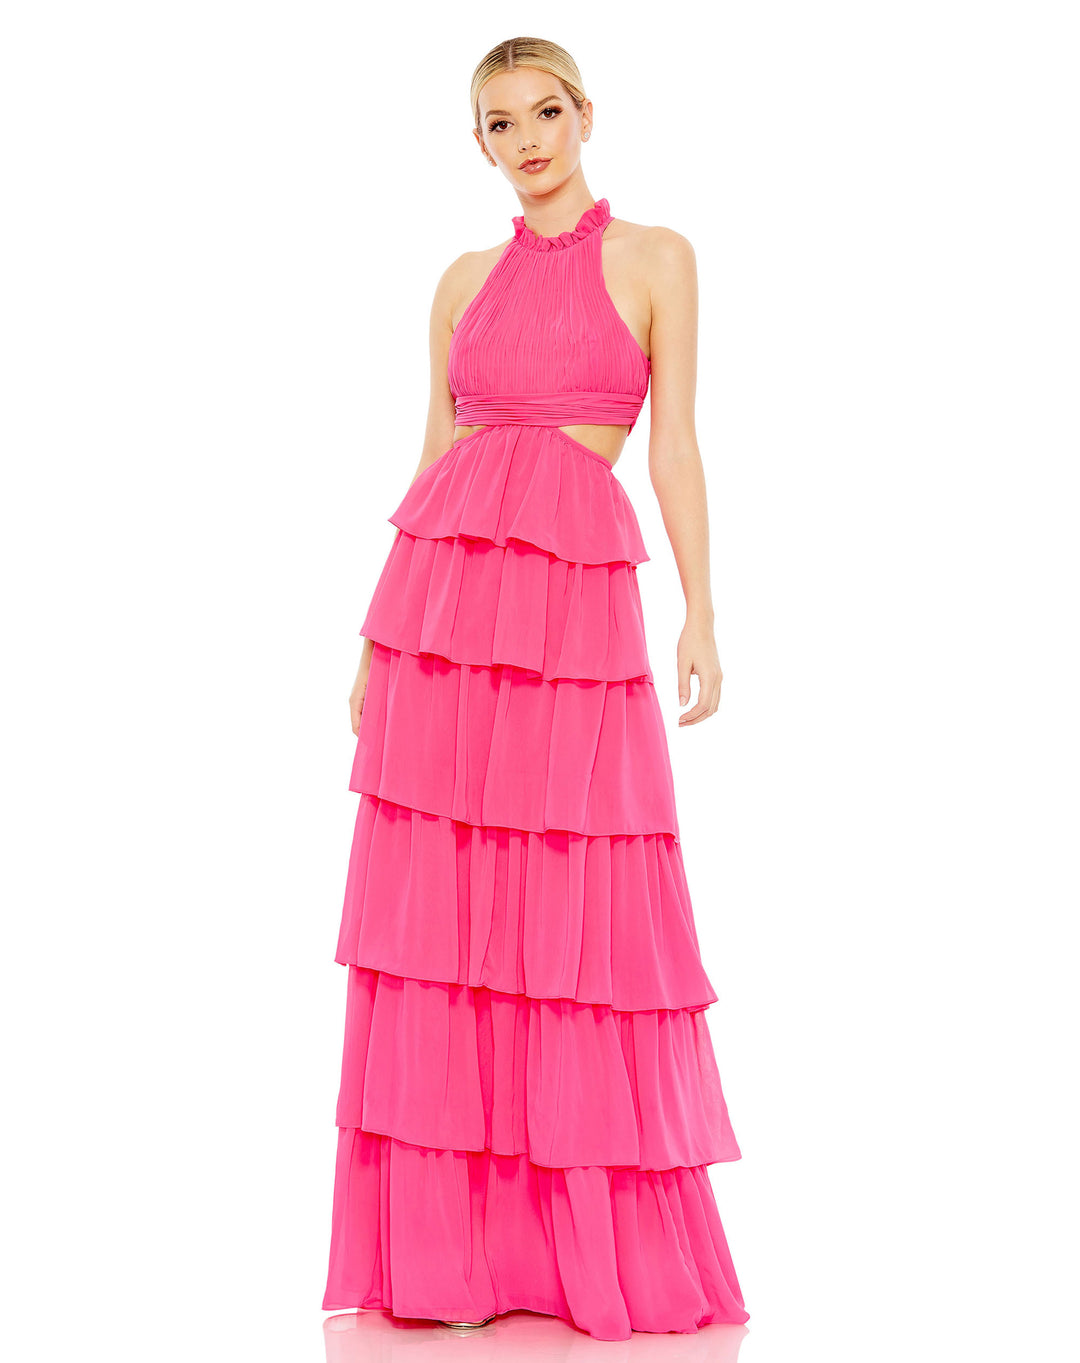 Tiered Ruffle Pleated High Neck Ball Gown – Mac Duggal